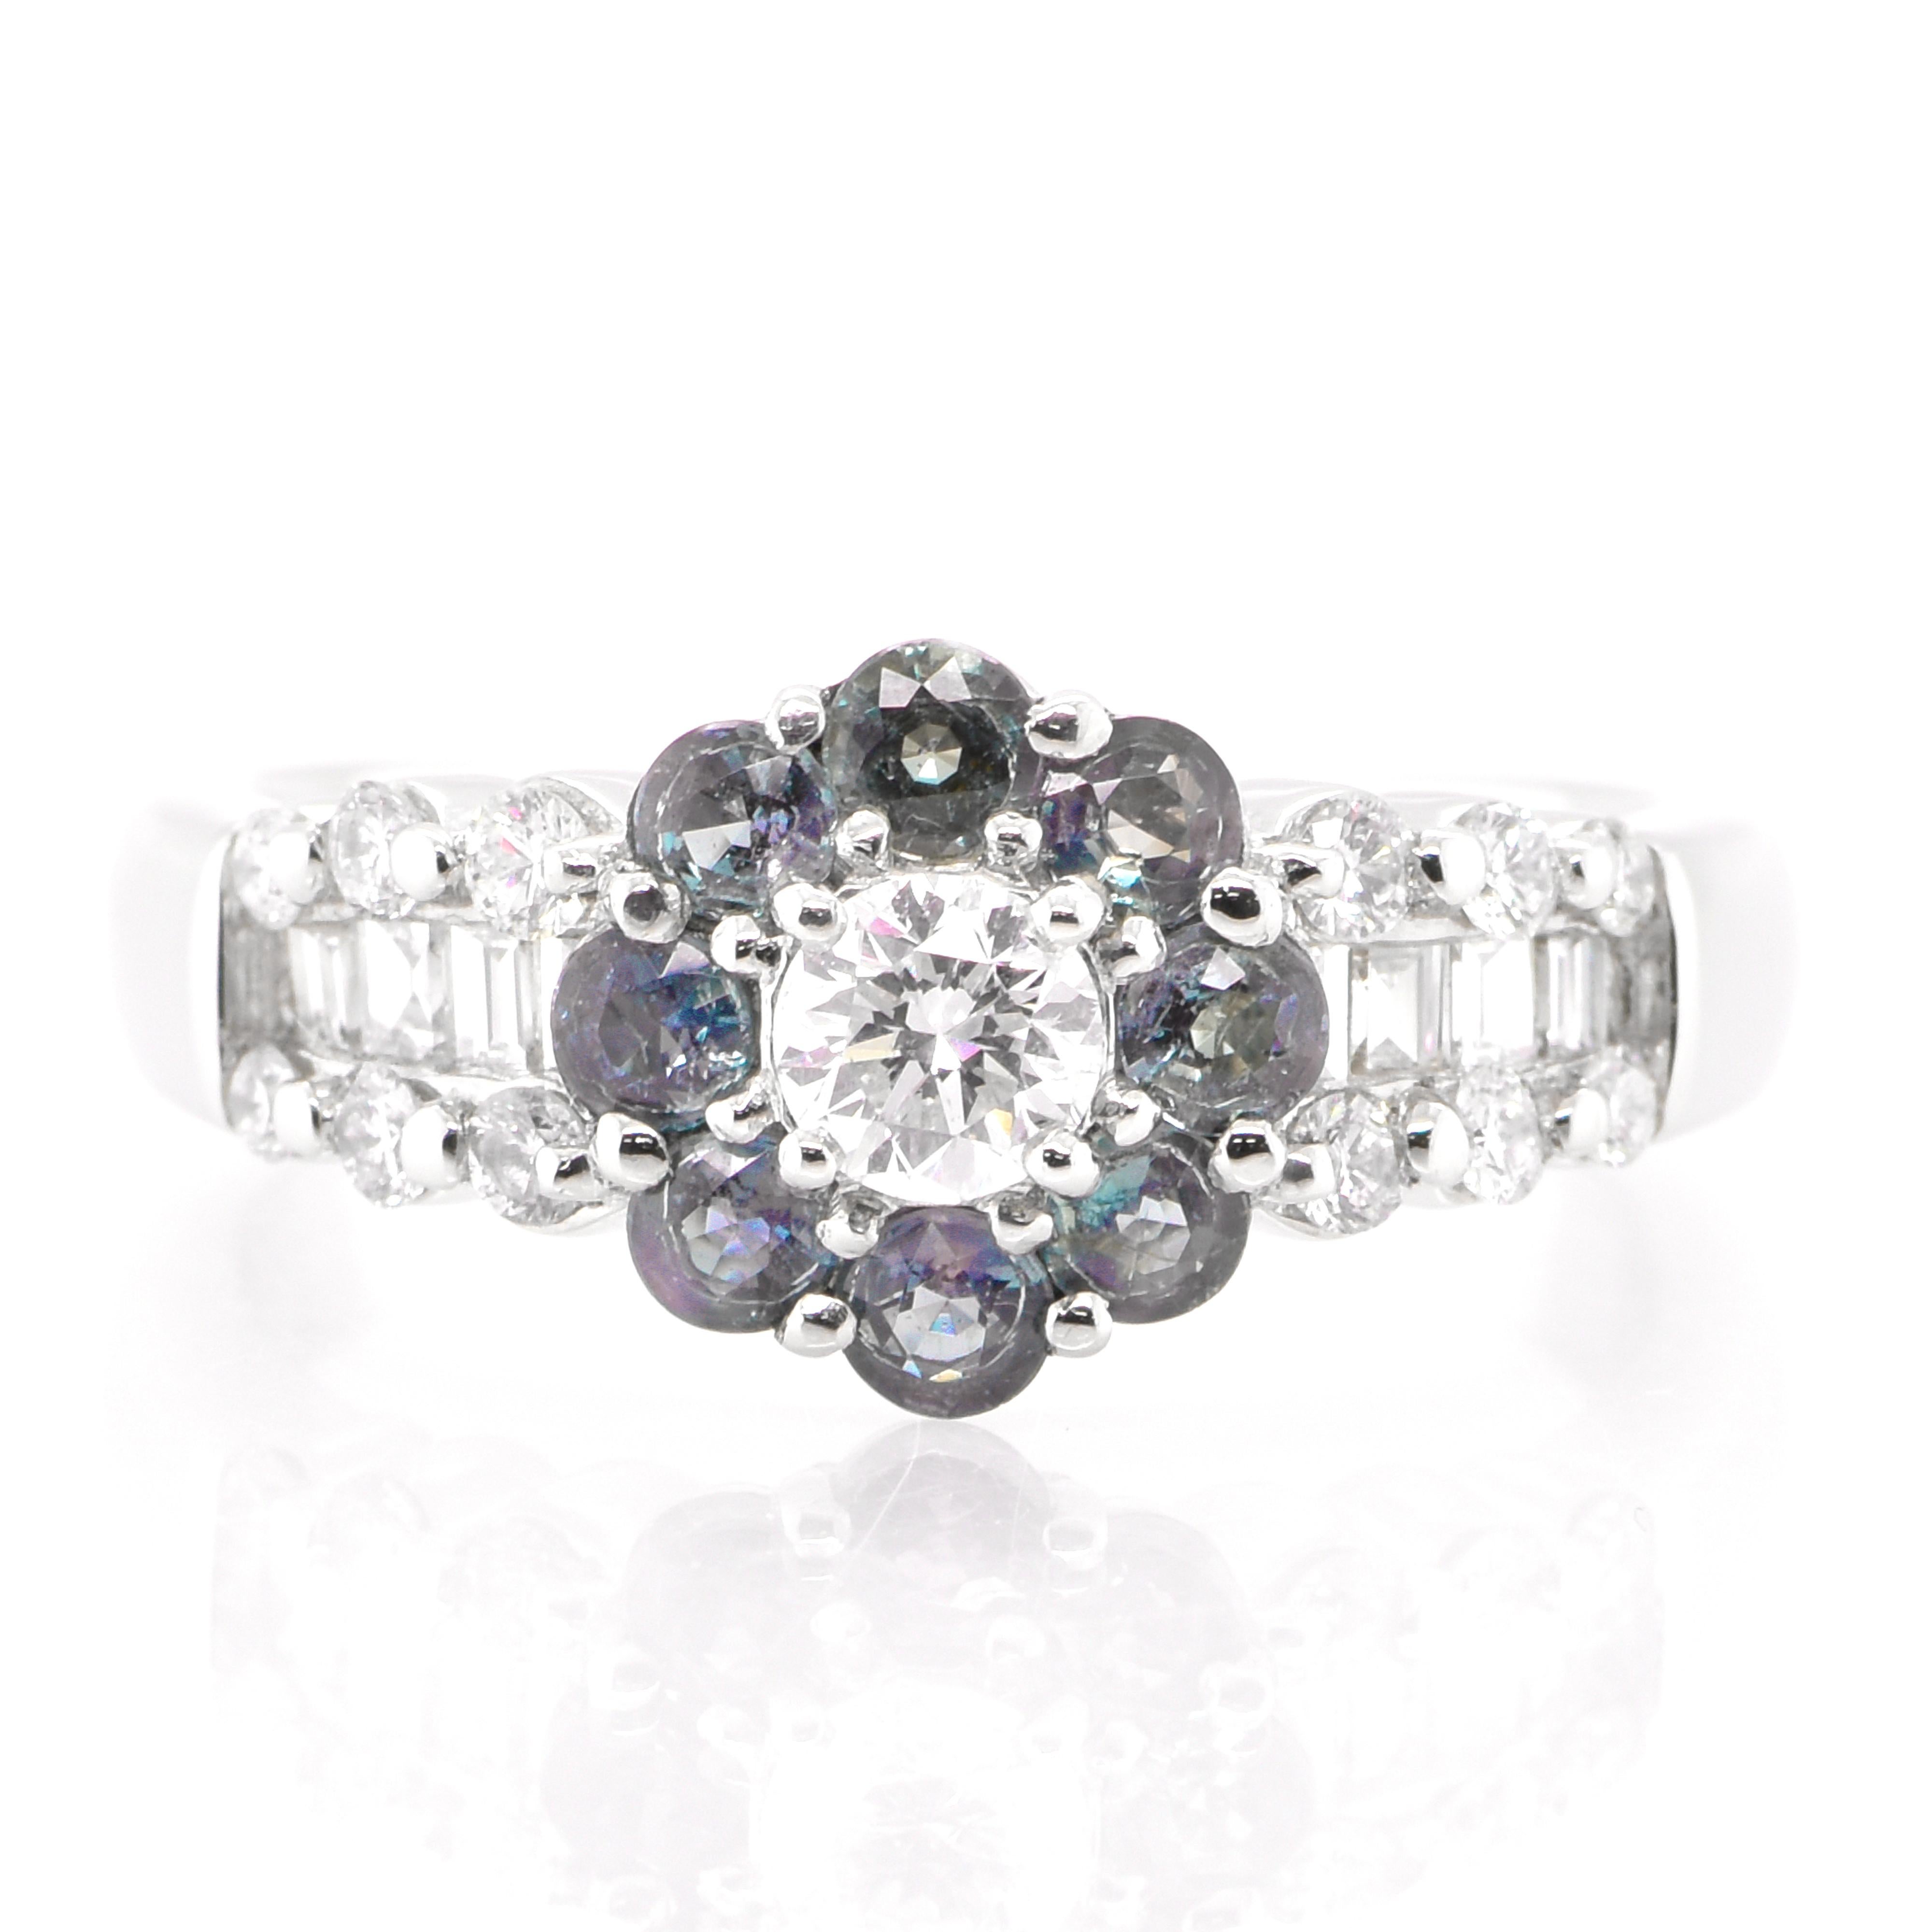 A beautiful ring featuring 0.60 Carats of Natural Alexandrites and 0.69 Carats Diamonds Ring set in Platinum. Diamonds have been adorned and cherished throughout human history and date back to thousands of years. They are rated as 10 on the Mohs